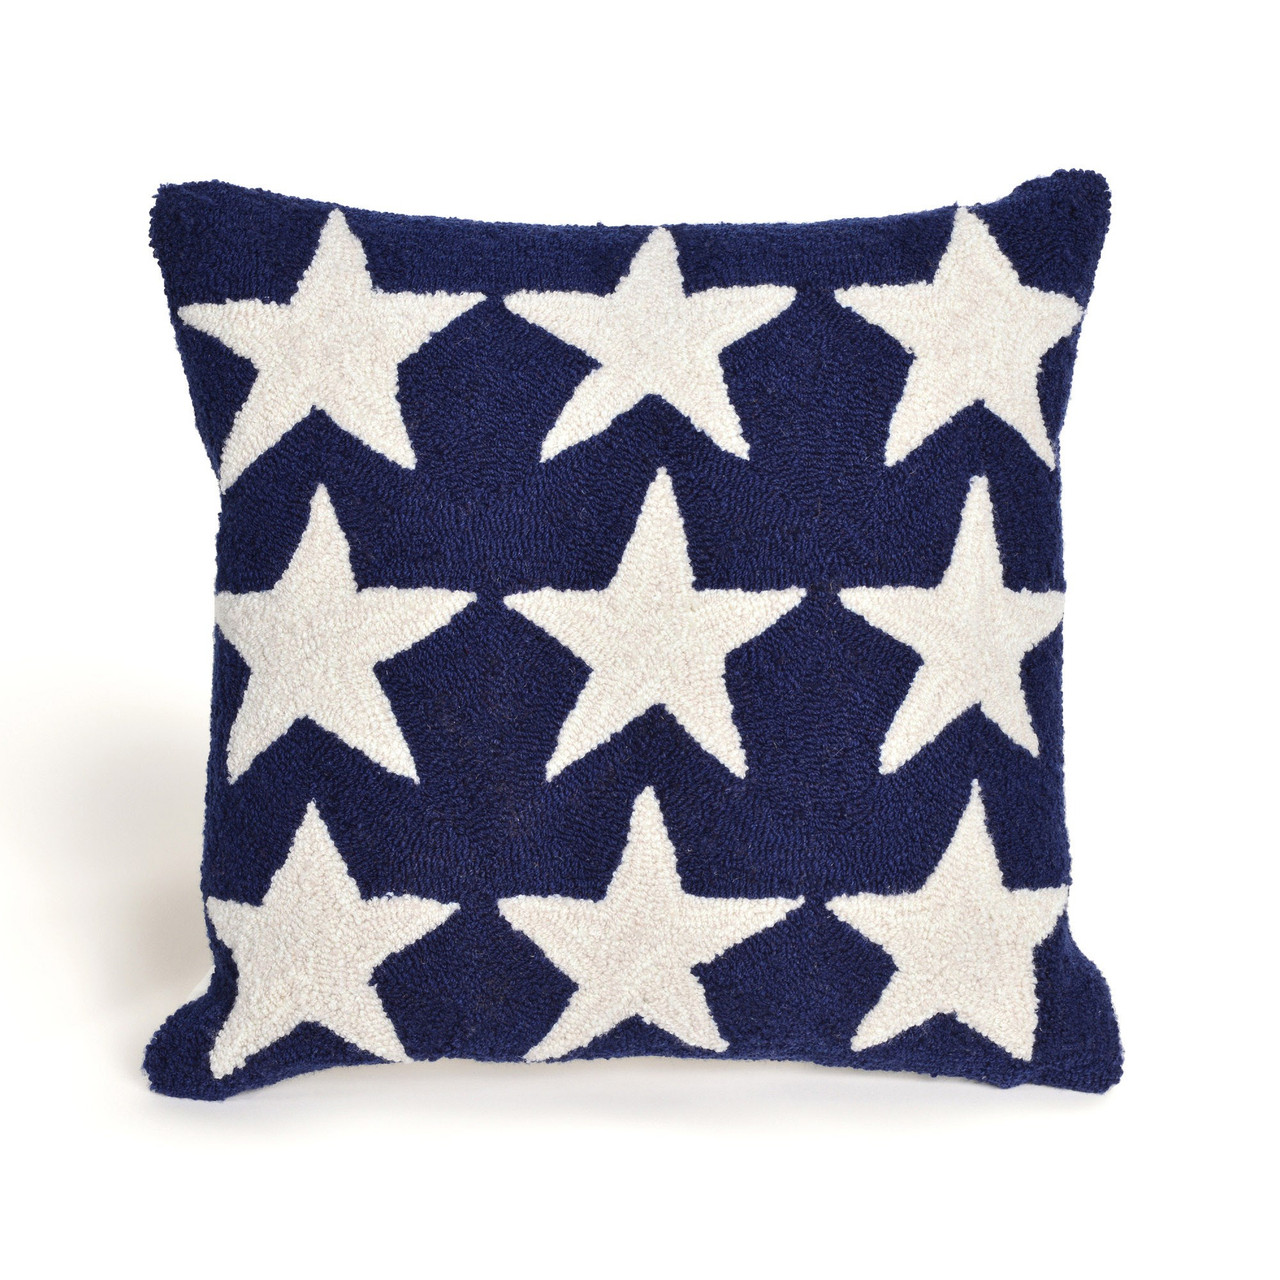 Frontporch Blue Stars Indoor/Outdoor Throw Pillow - 18" Square